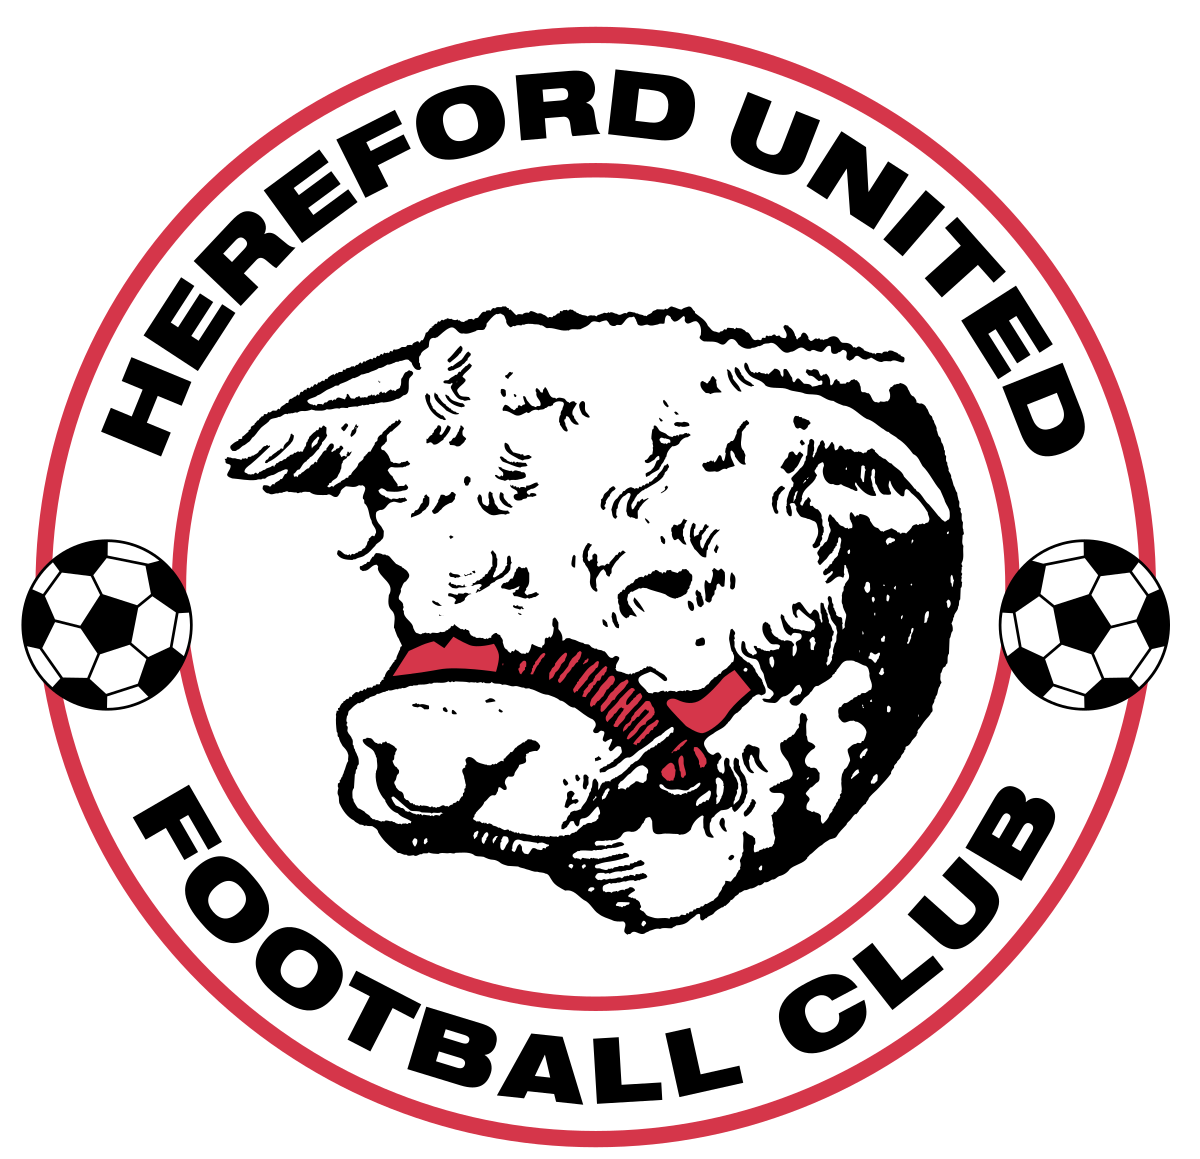 ARCHIVE | Hereford United 5-0 Oldham Athletic – 17th January 2009